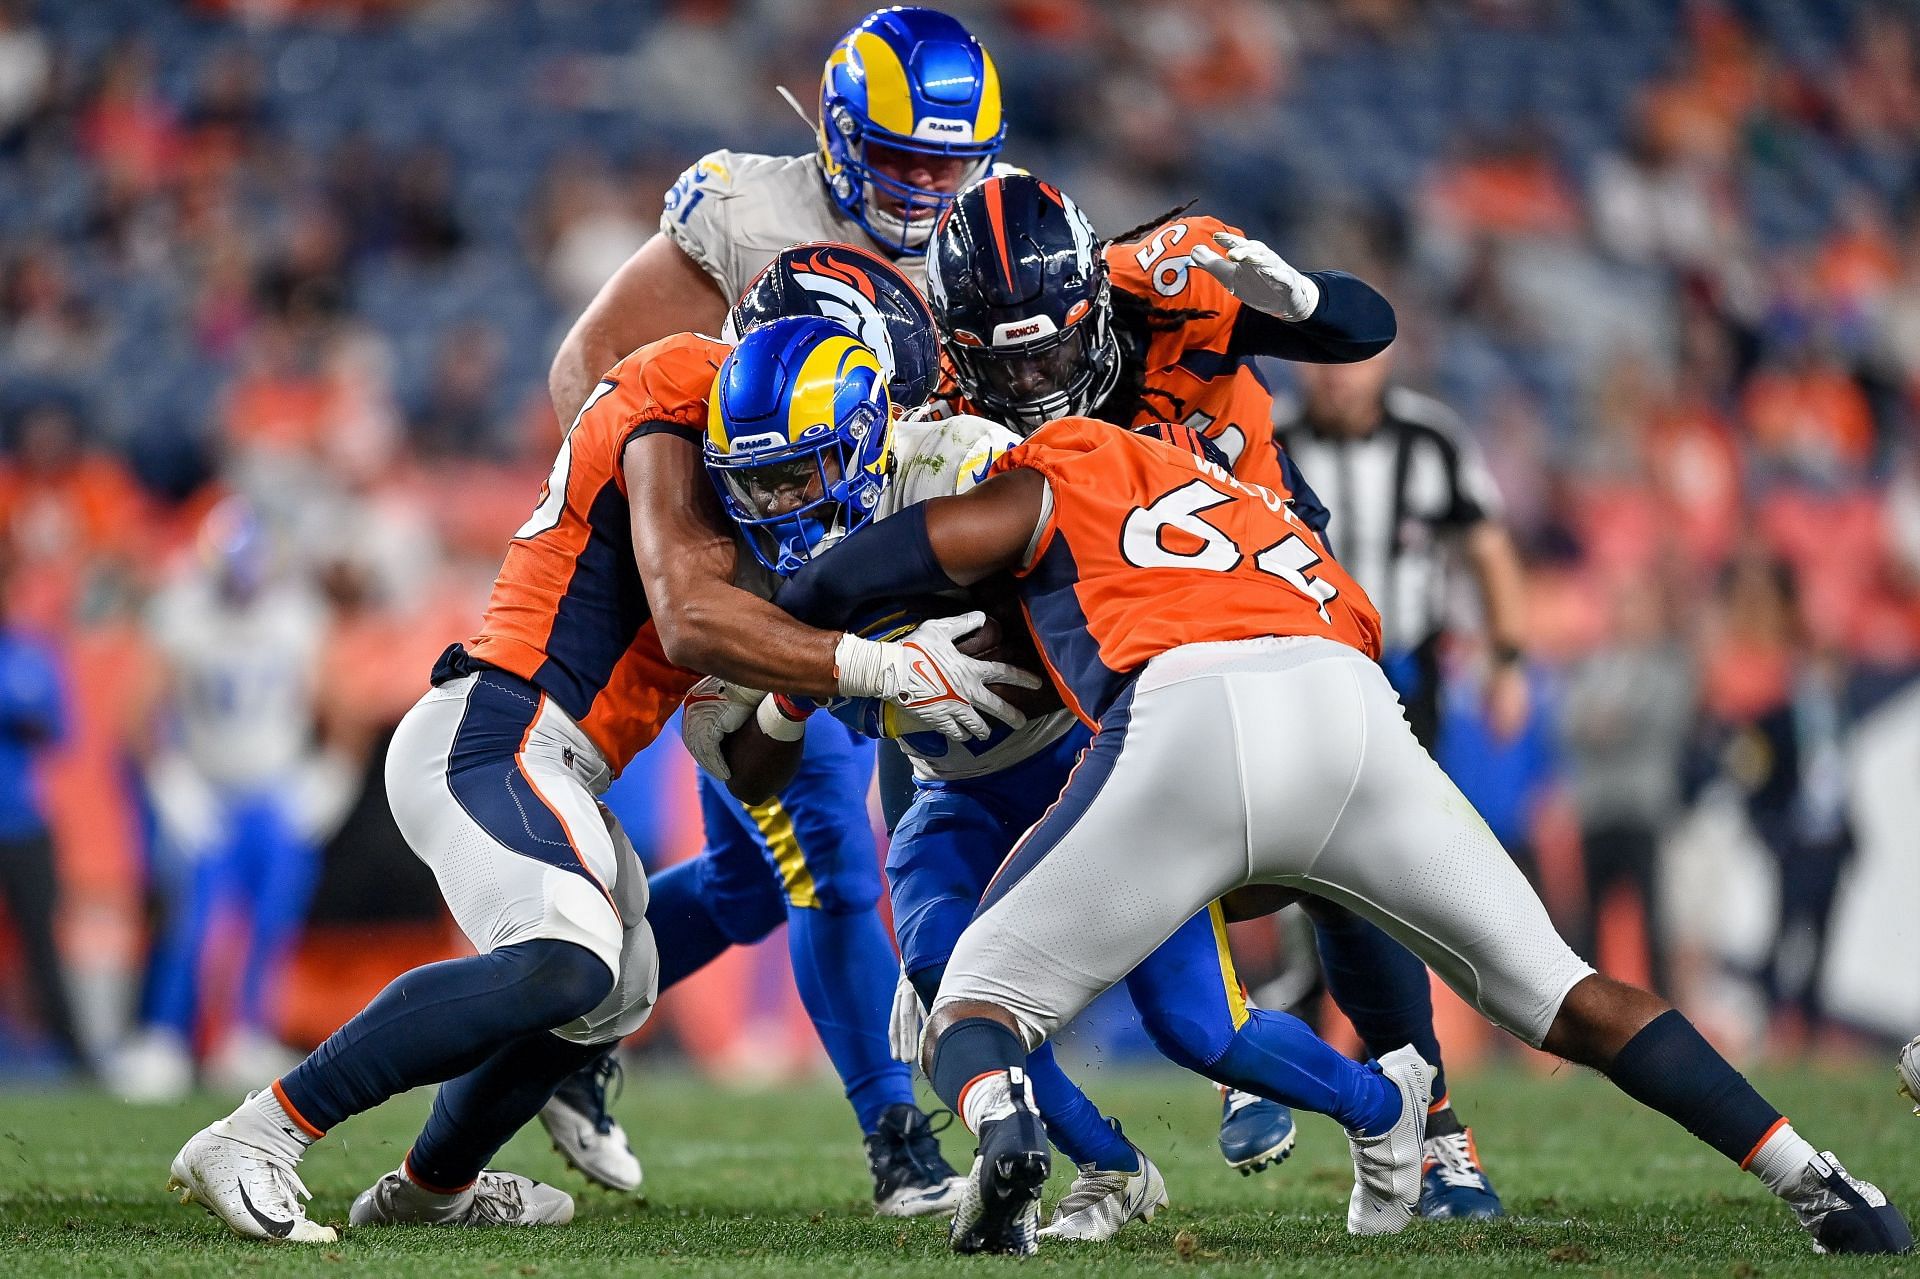 The defending champs take on the new-look Broncos on Christmas day